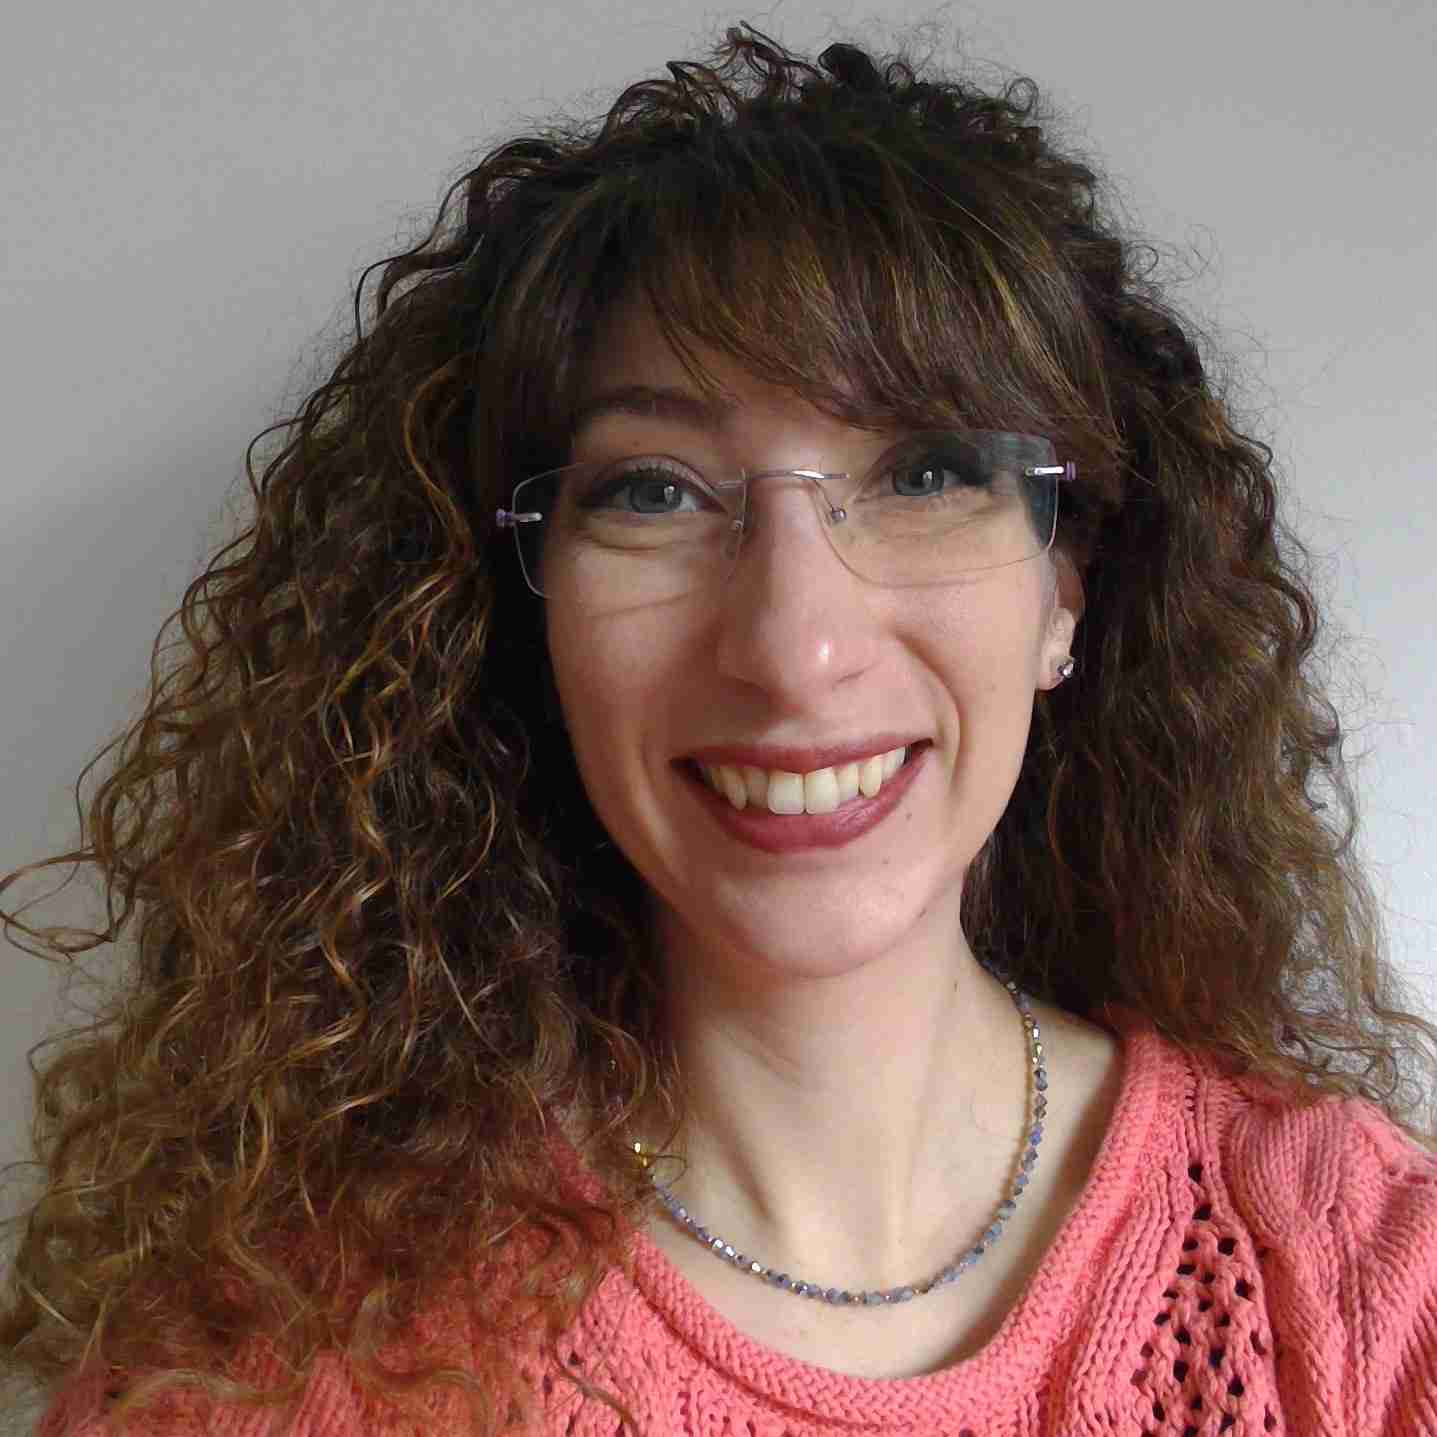 Profile image of Dr LUISA CIANO